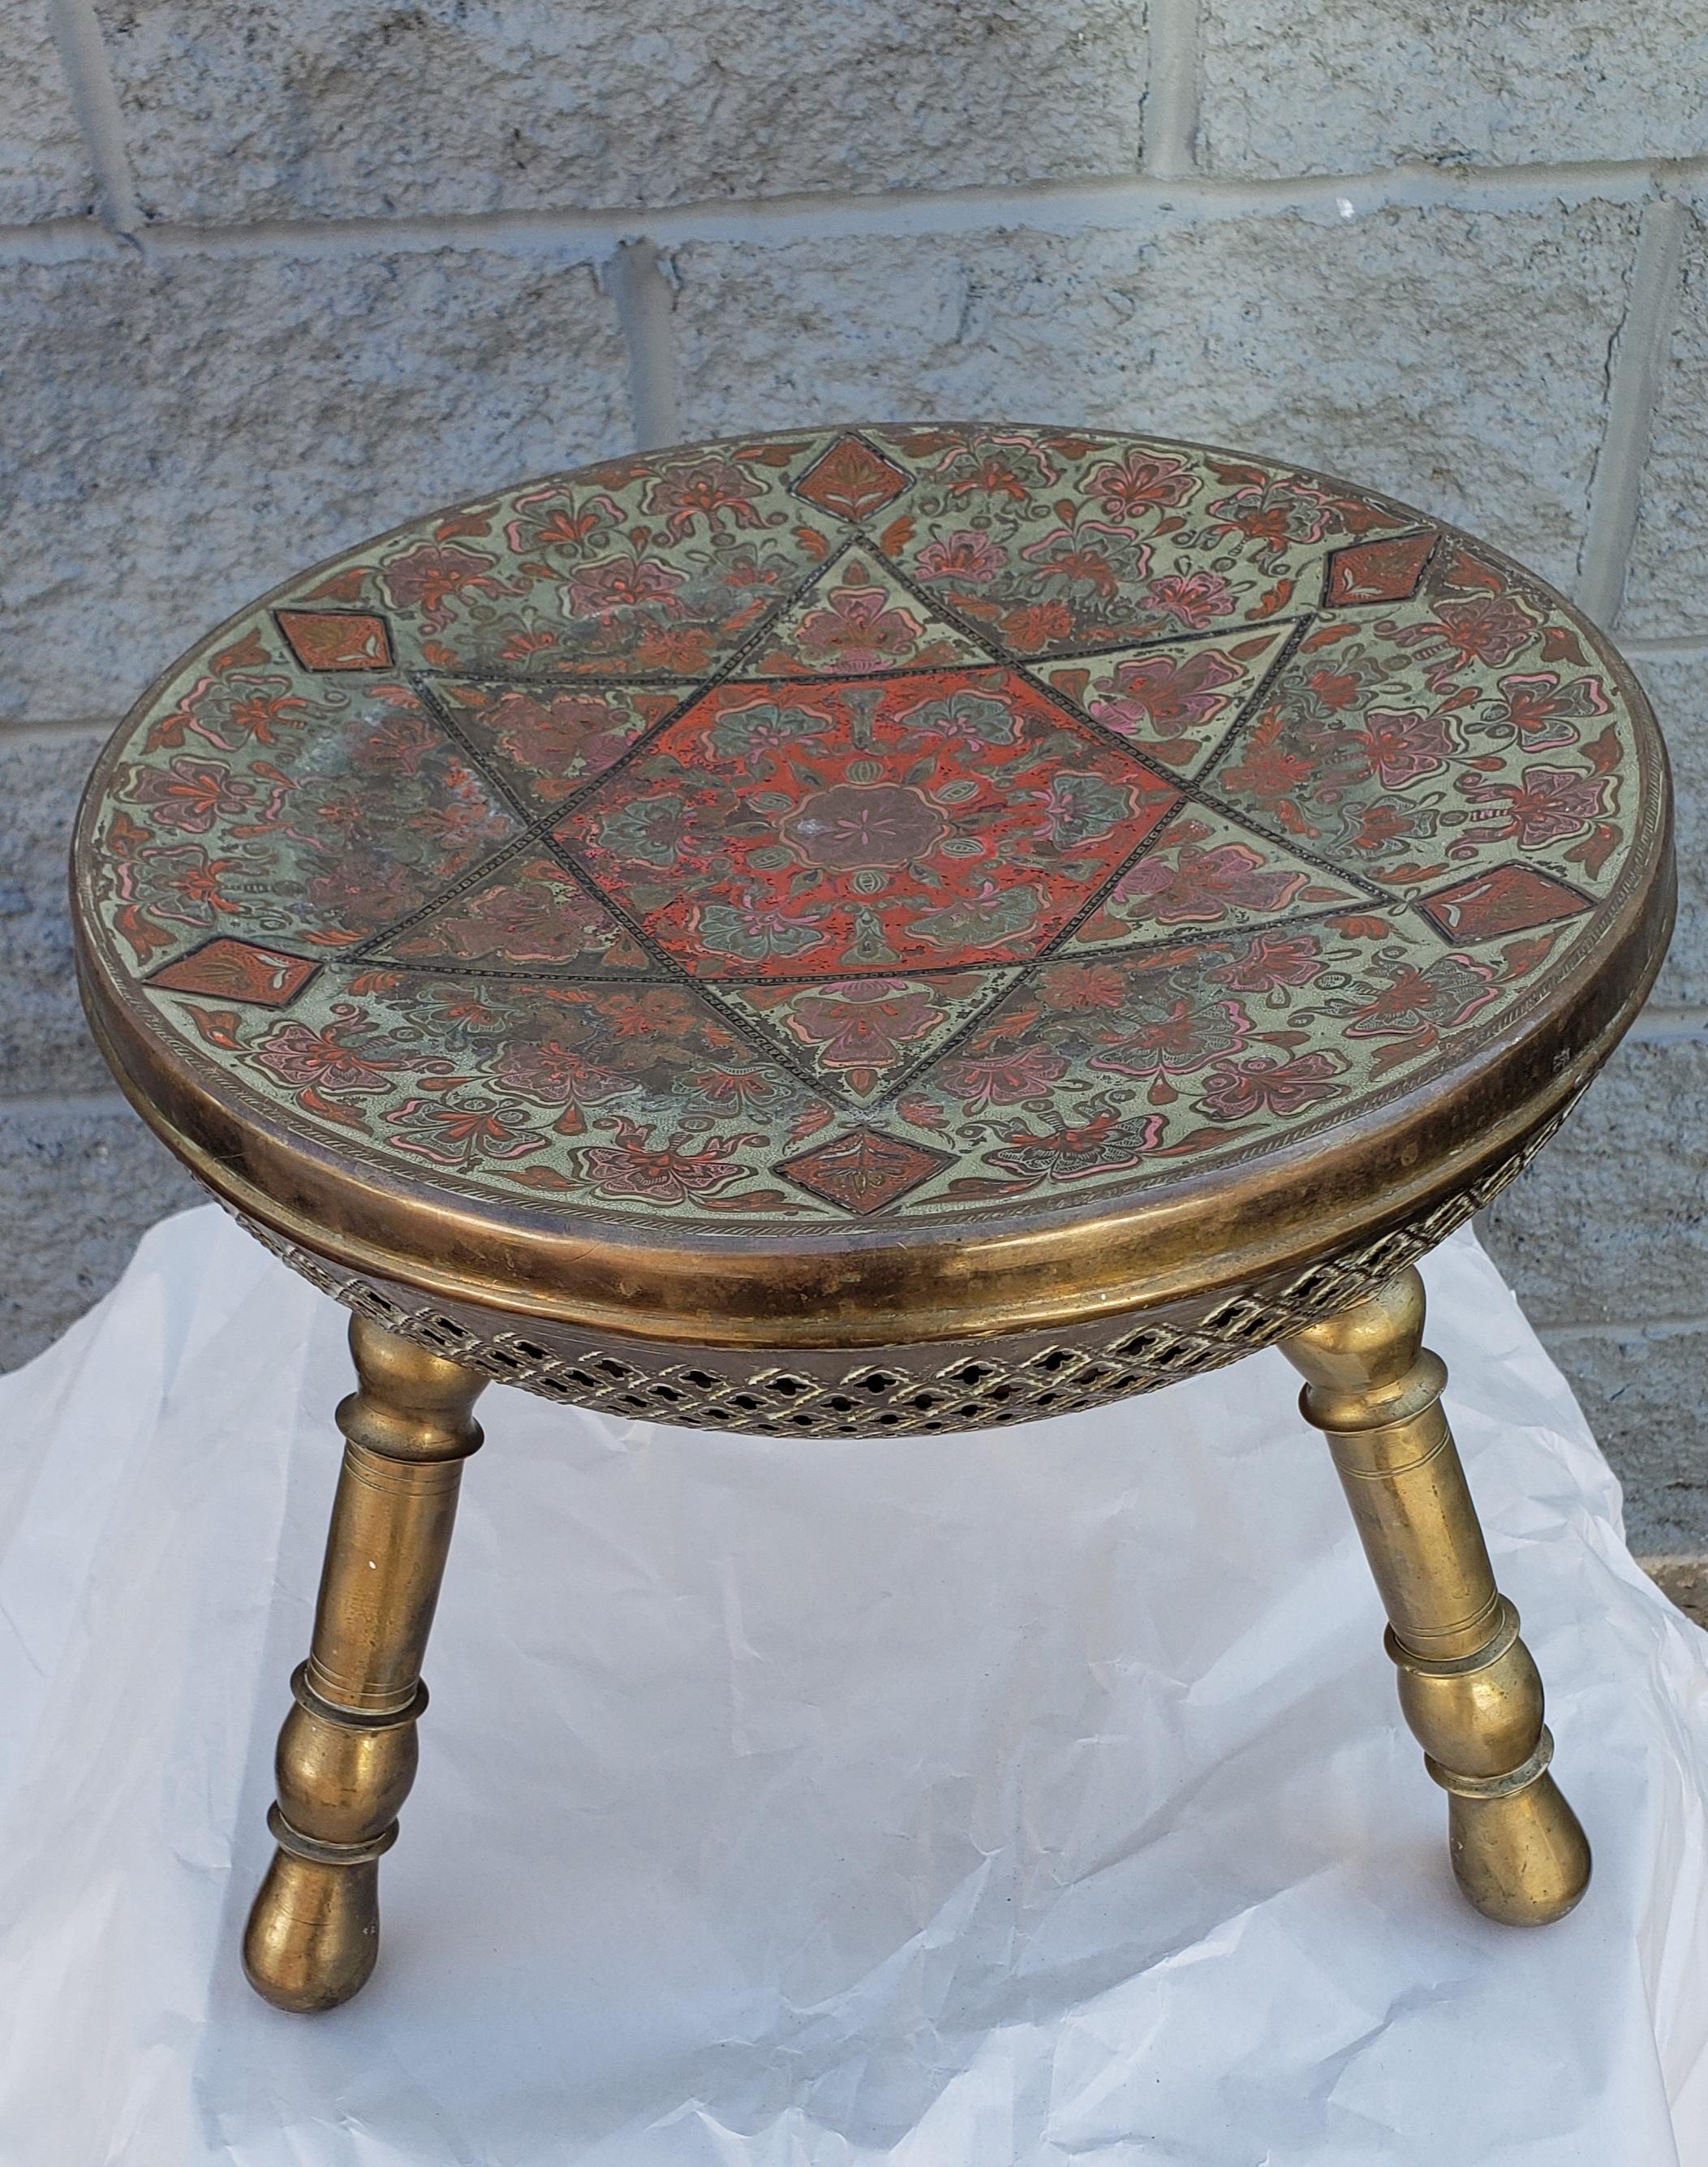 Indian Repoussé & Engraved Brass Bowl / Planter on Engraved Brass Stand / Stool For Sale 7